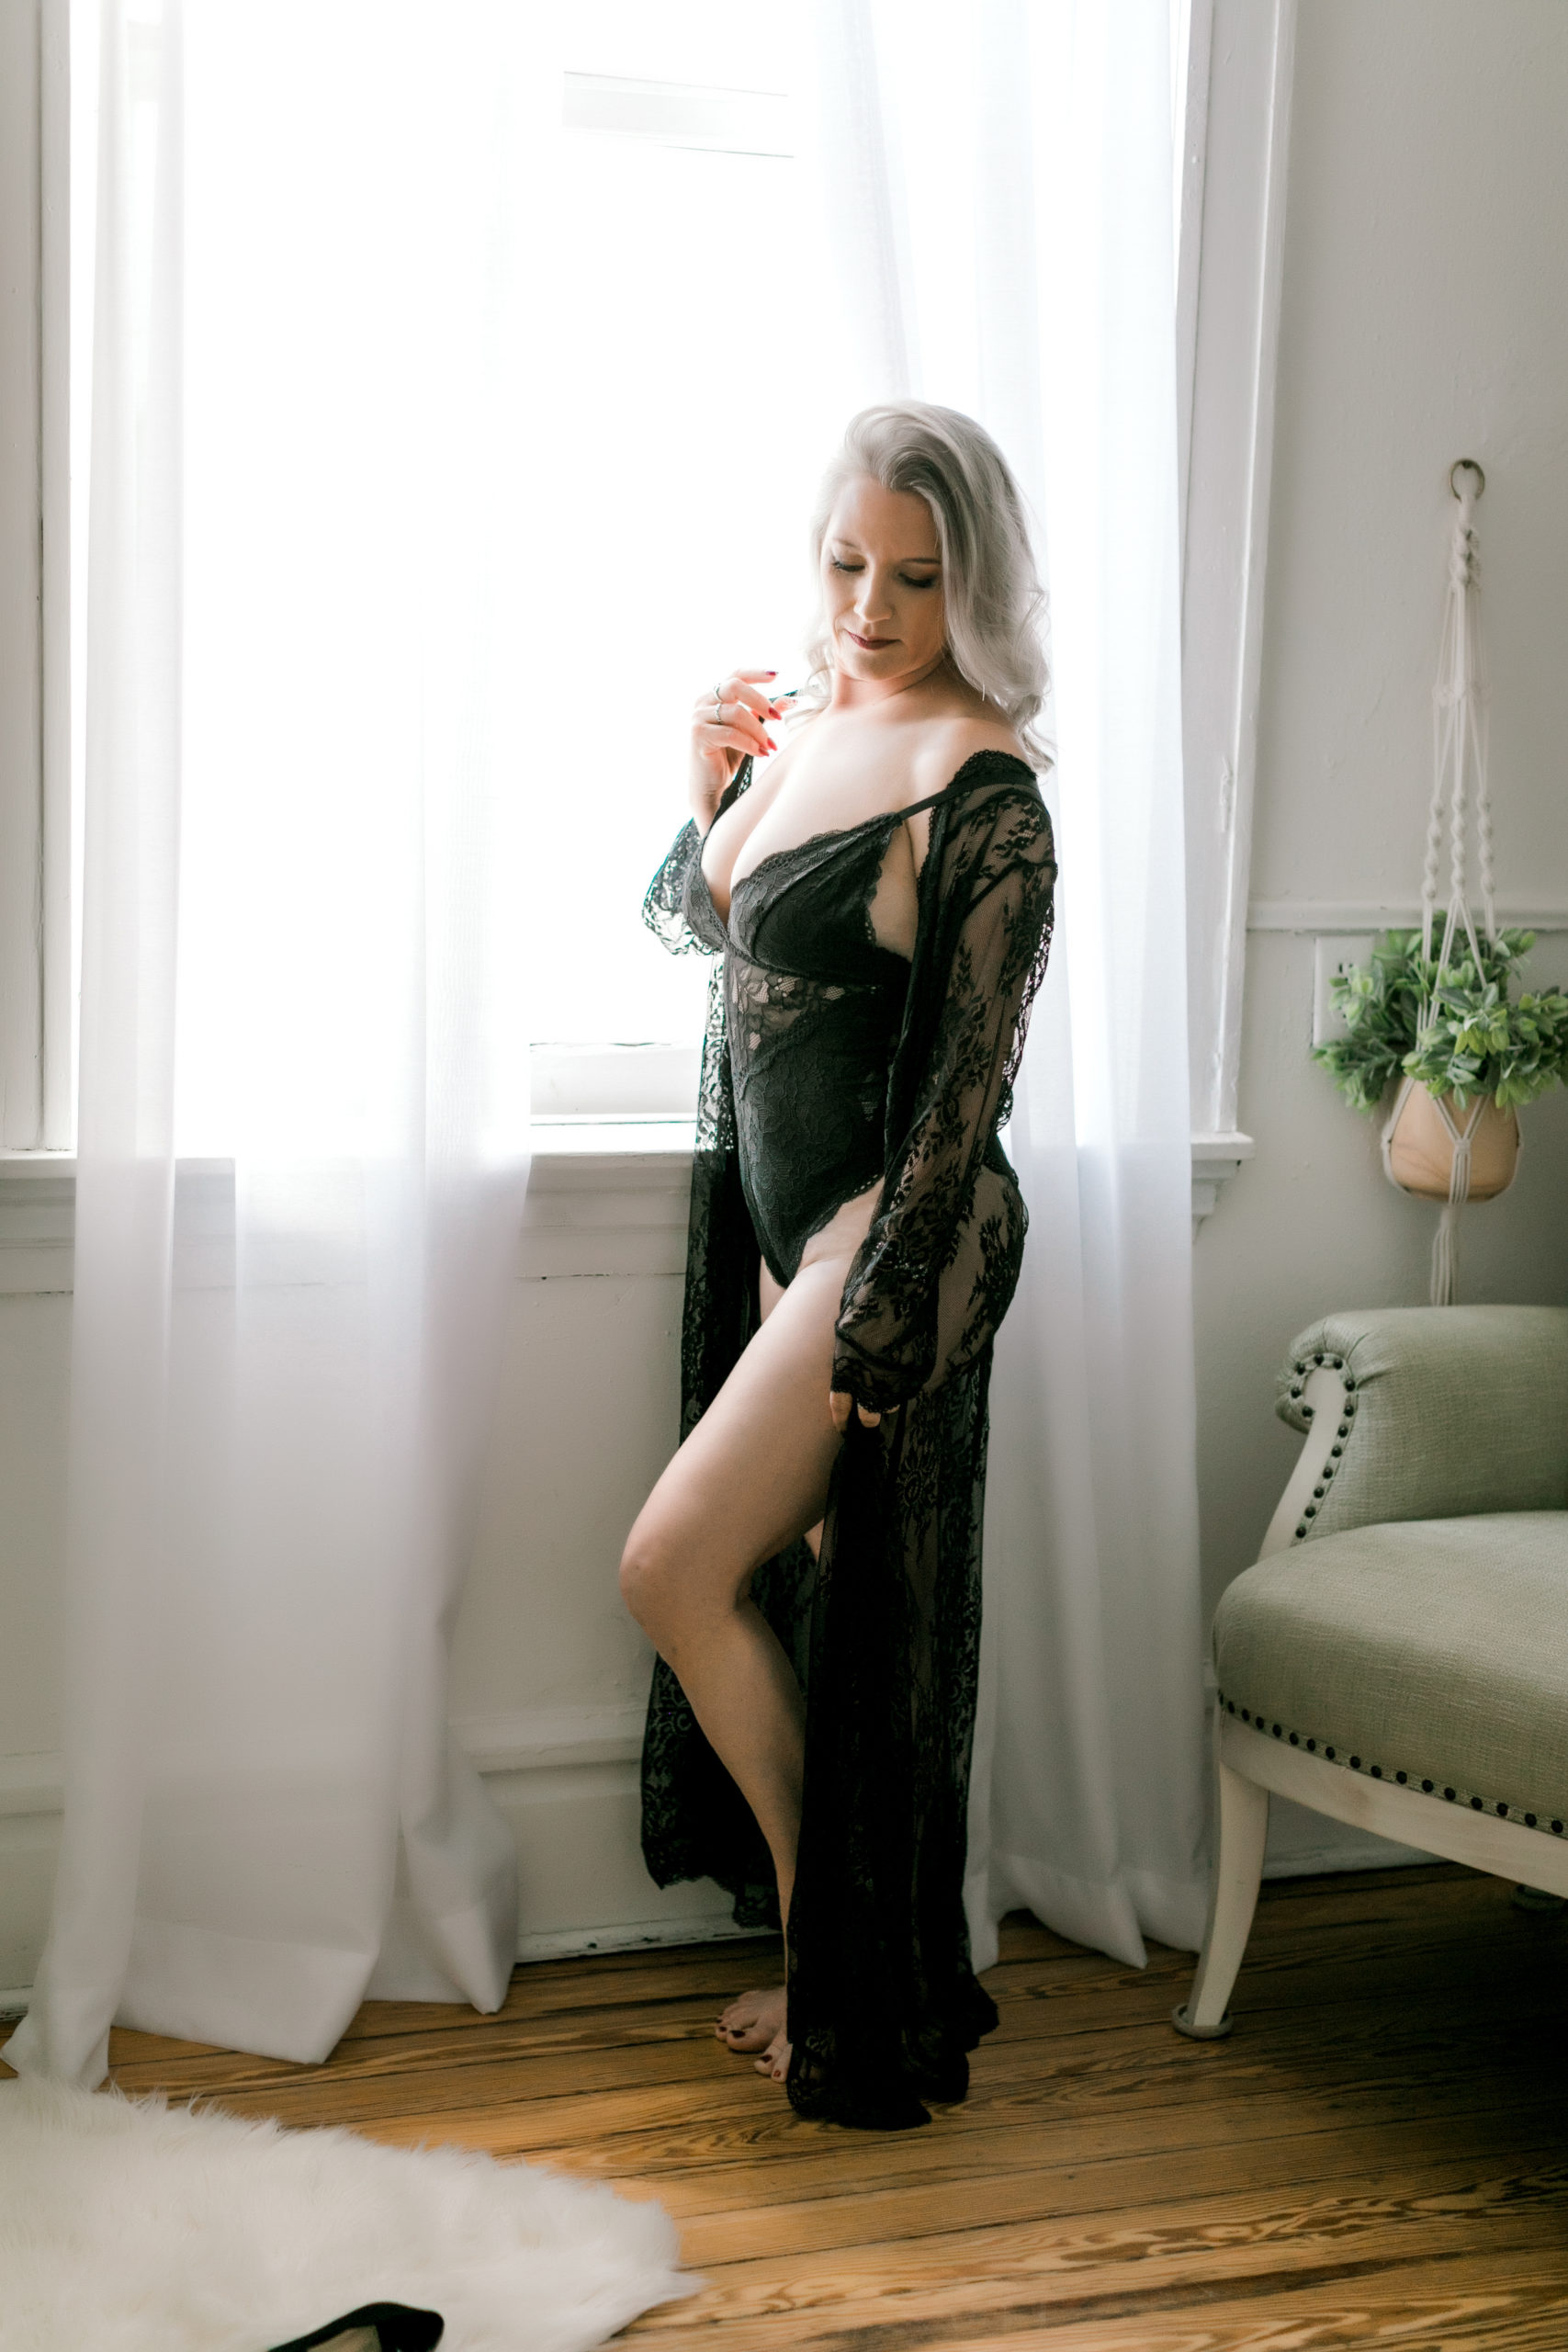 No matter your weight, height or body type, try these tips for posing like a pro next time a camera is pointed your way! -- Black lace bodysuits with floor length robe -- sexy boudoir outfit